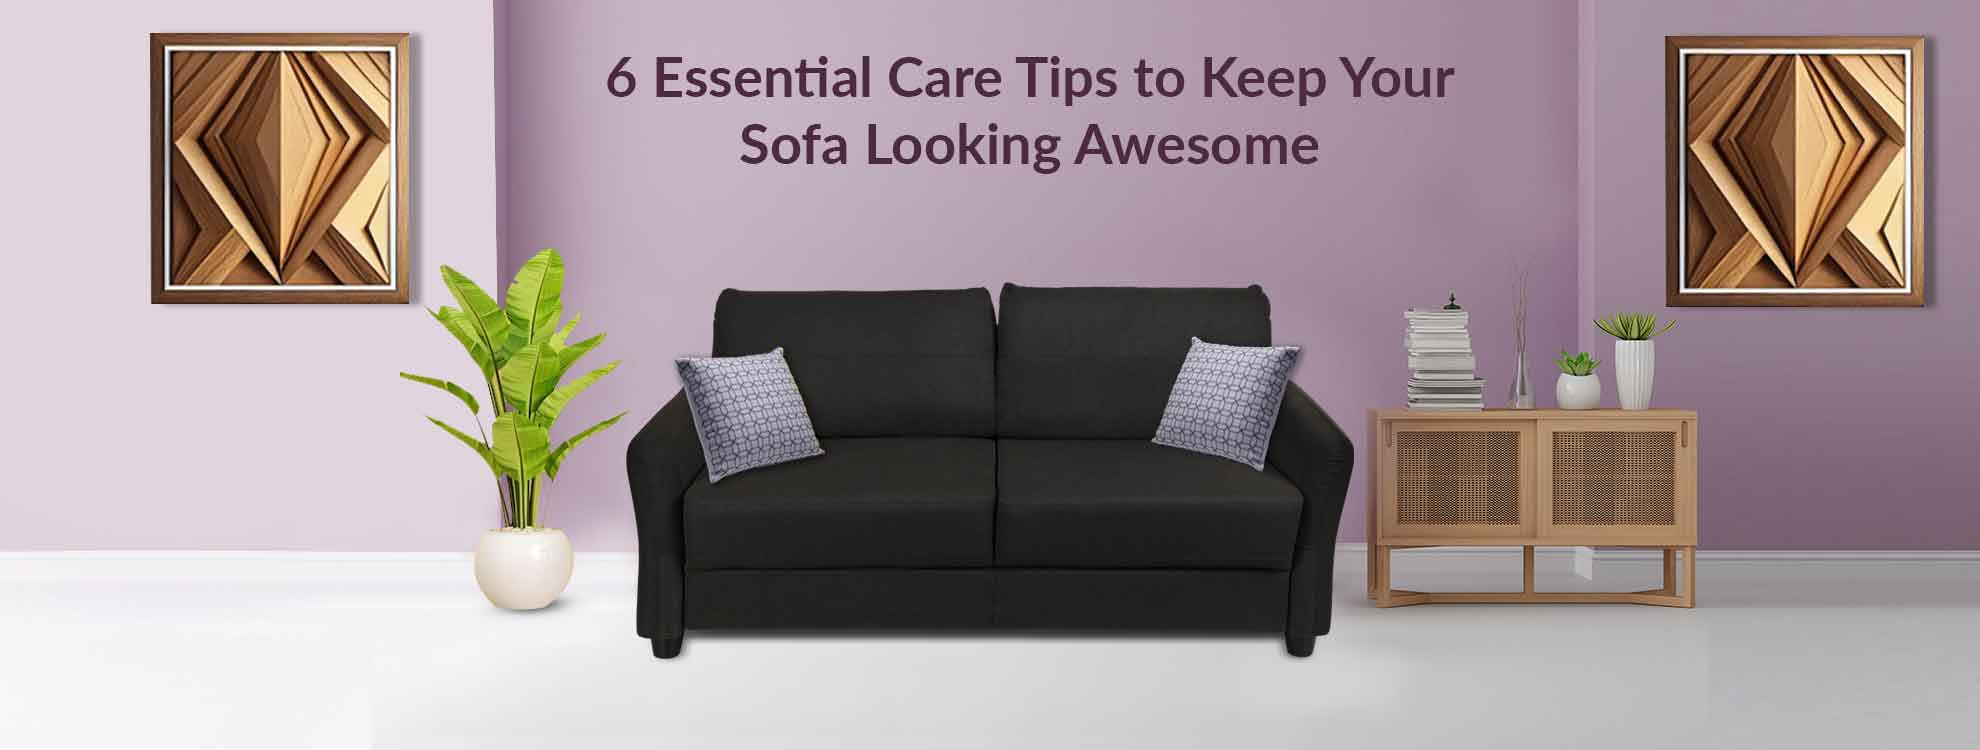 How to Make a Couch More Comfortable With 6 Simple Tips & Tricks